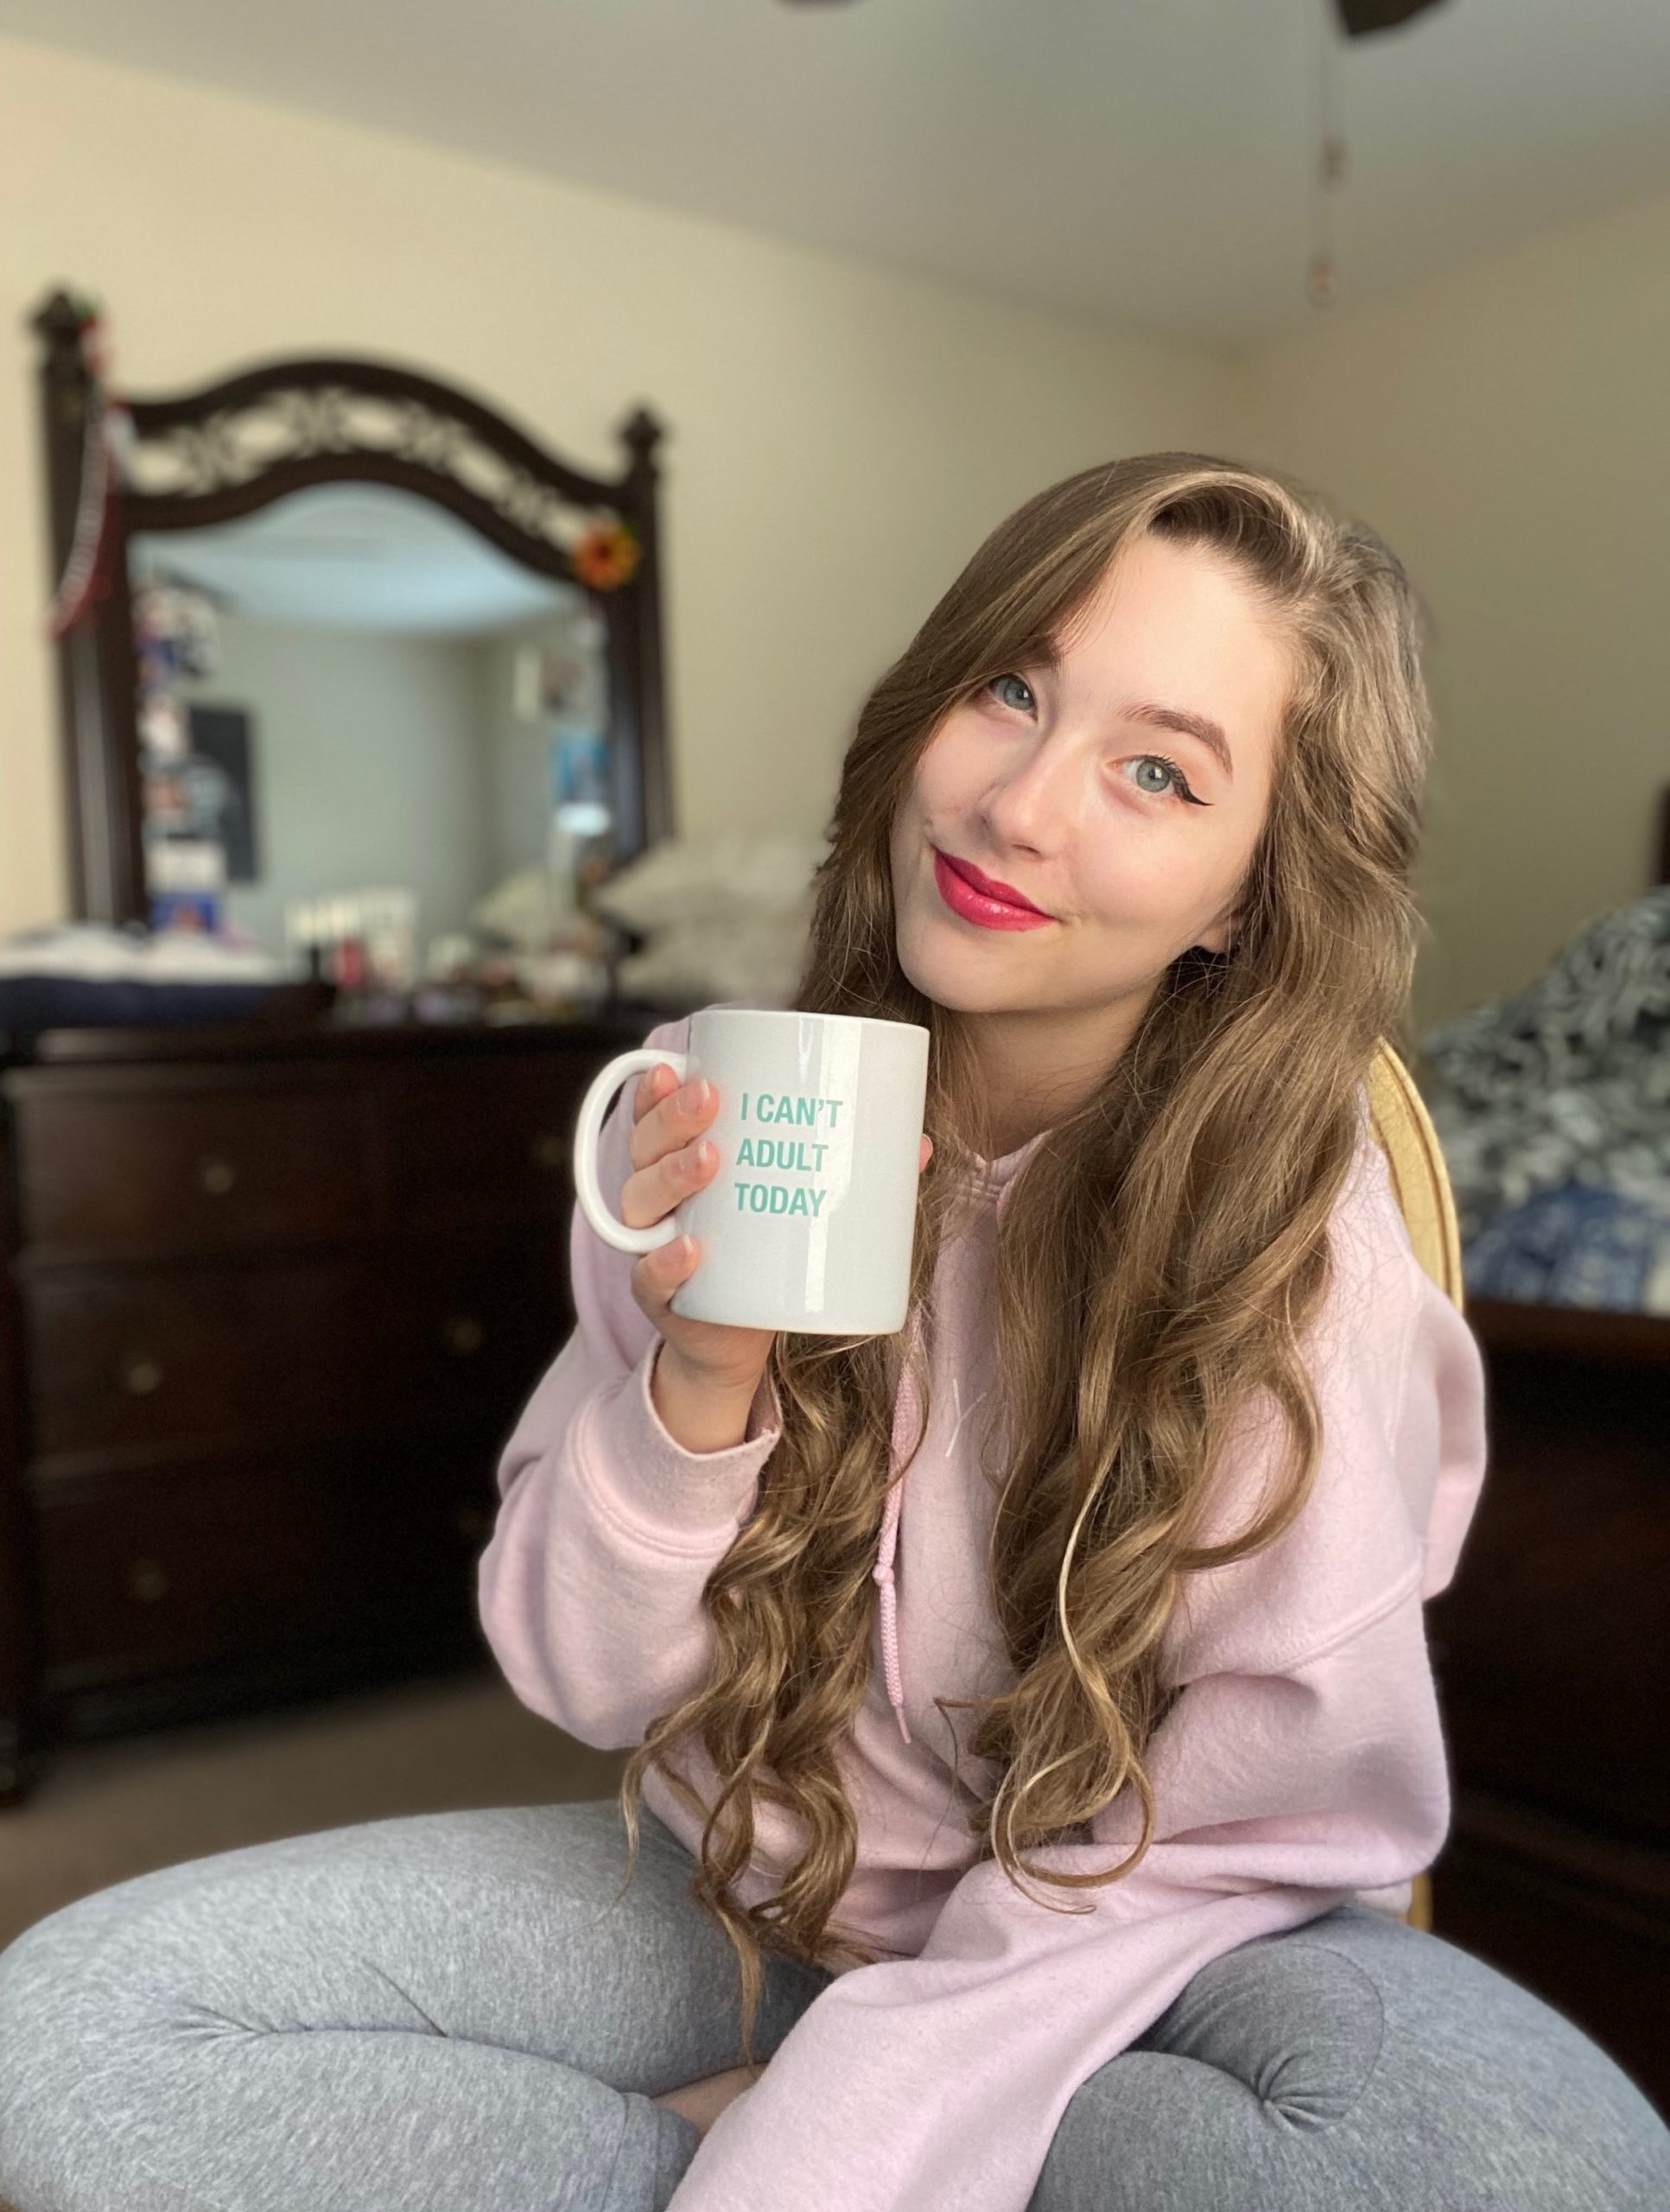 Alexis with a coffee mug focusing on adjusting to university life and work balance